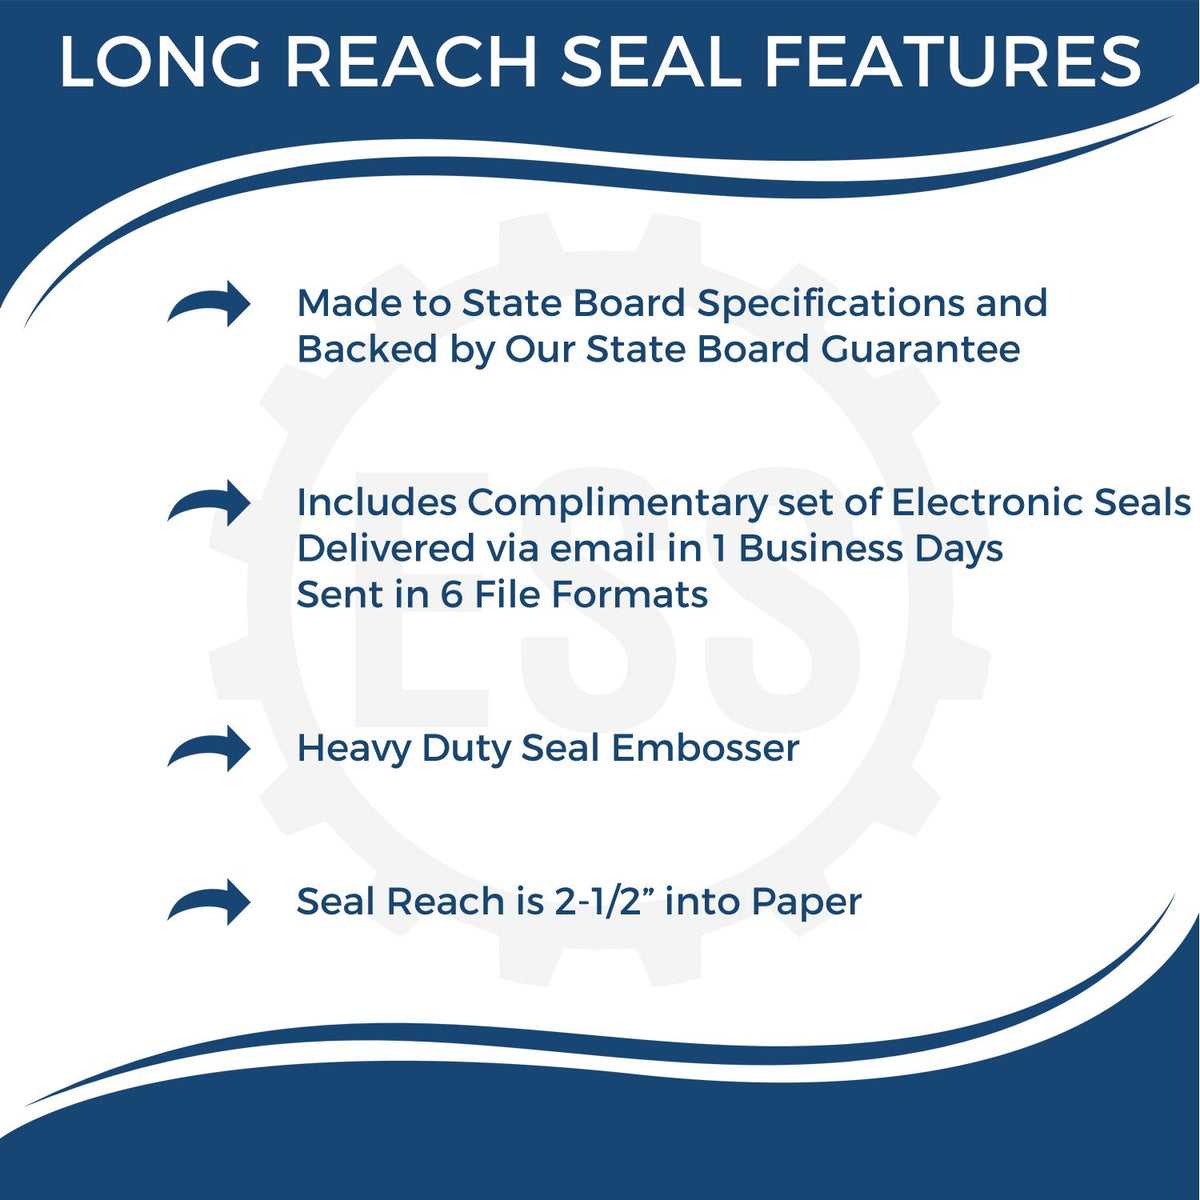 A picture of an infographic highlighting the selling points for the Long Reach Missouri Geology Seal